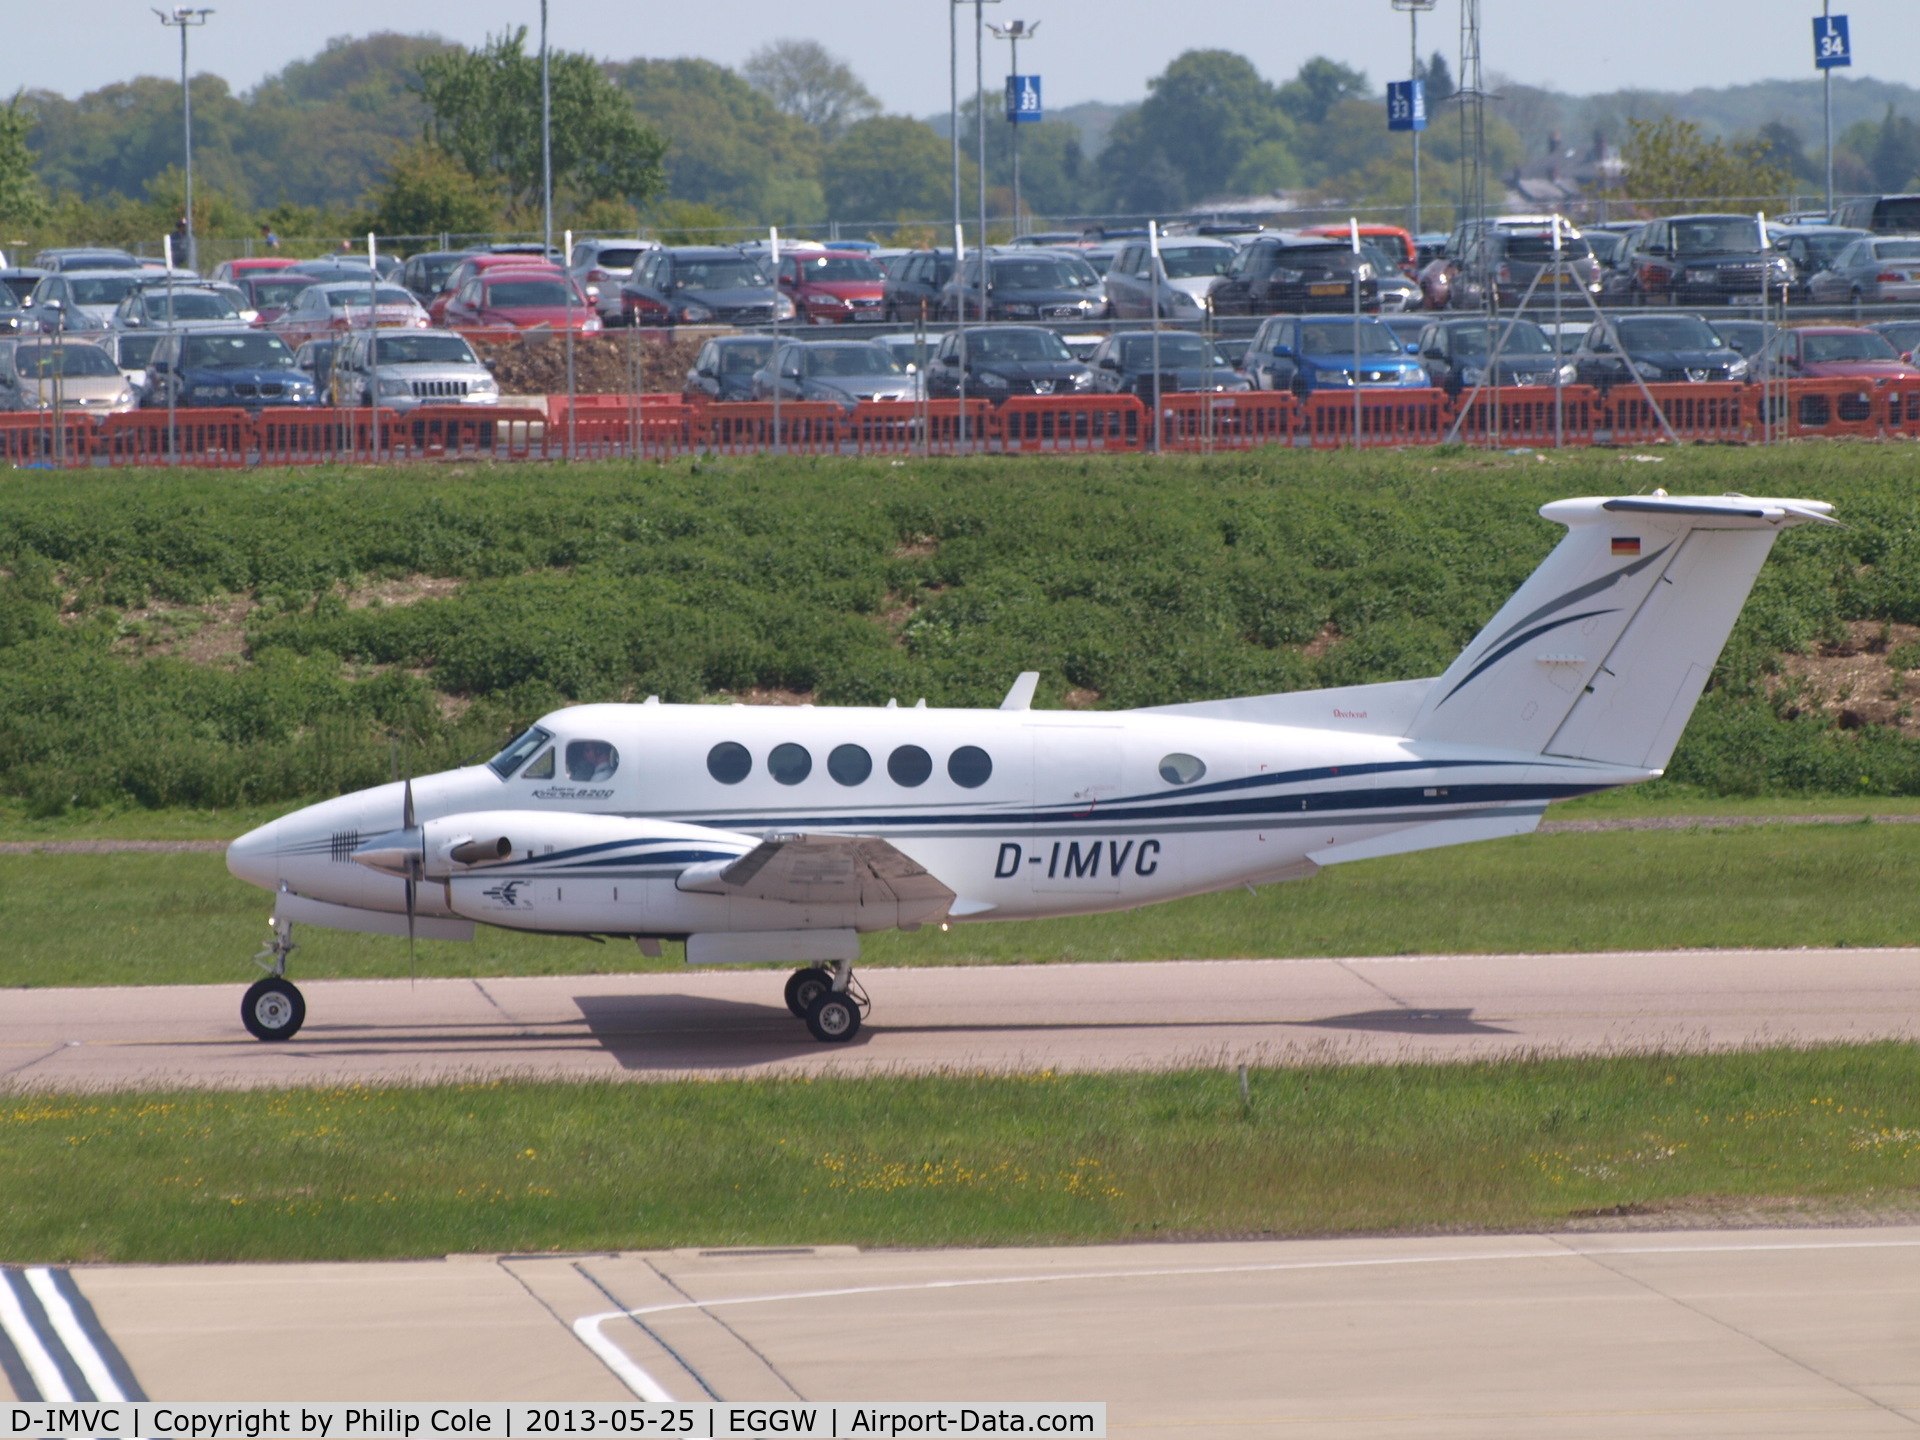 D-IMVC, 2000 Raytheon B200 King Air C/N BB-1741, Visitor to Luton for the Football